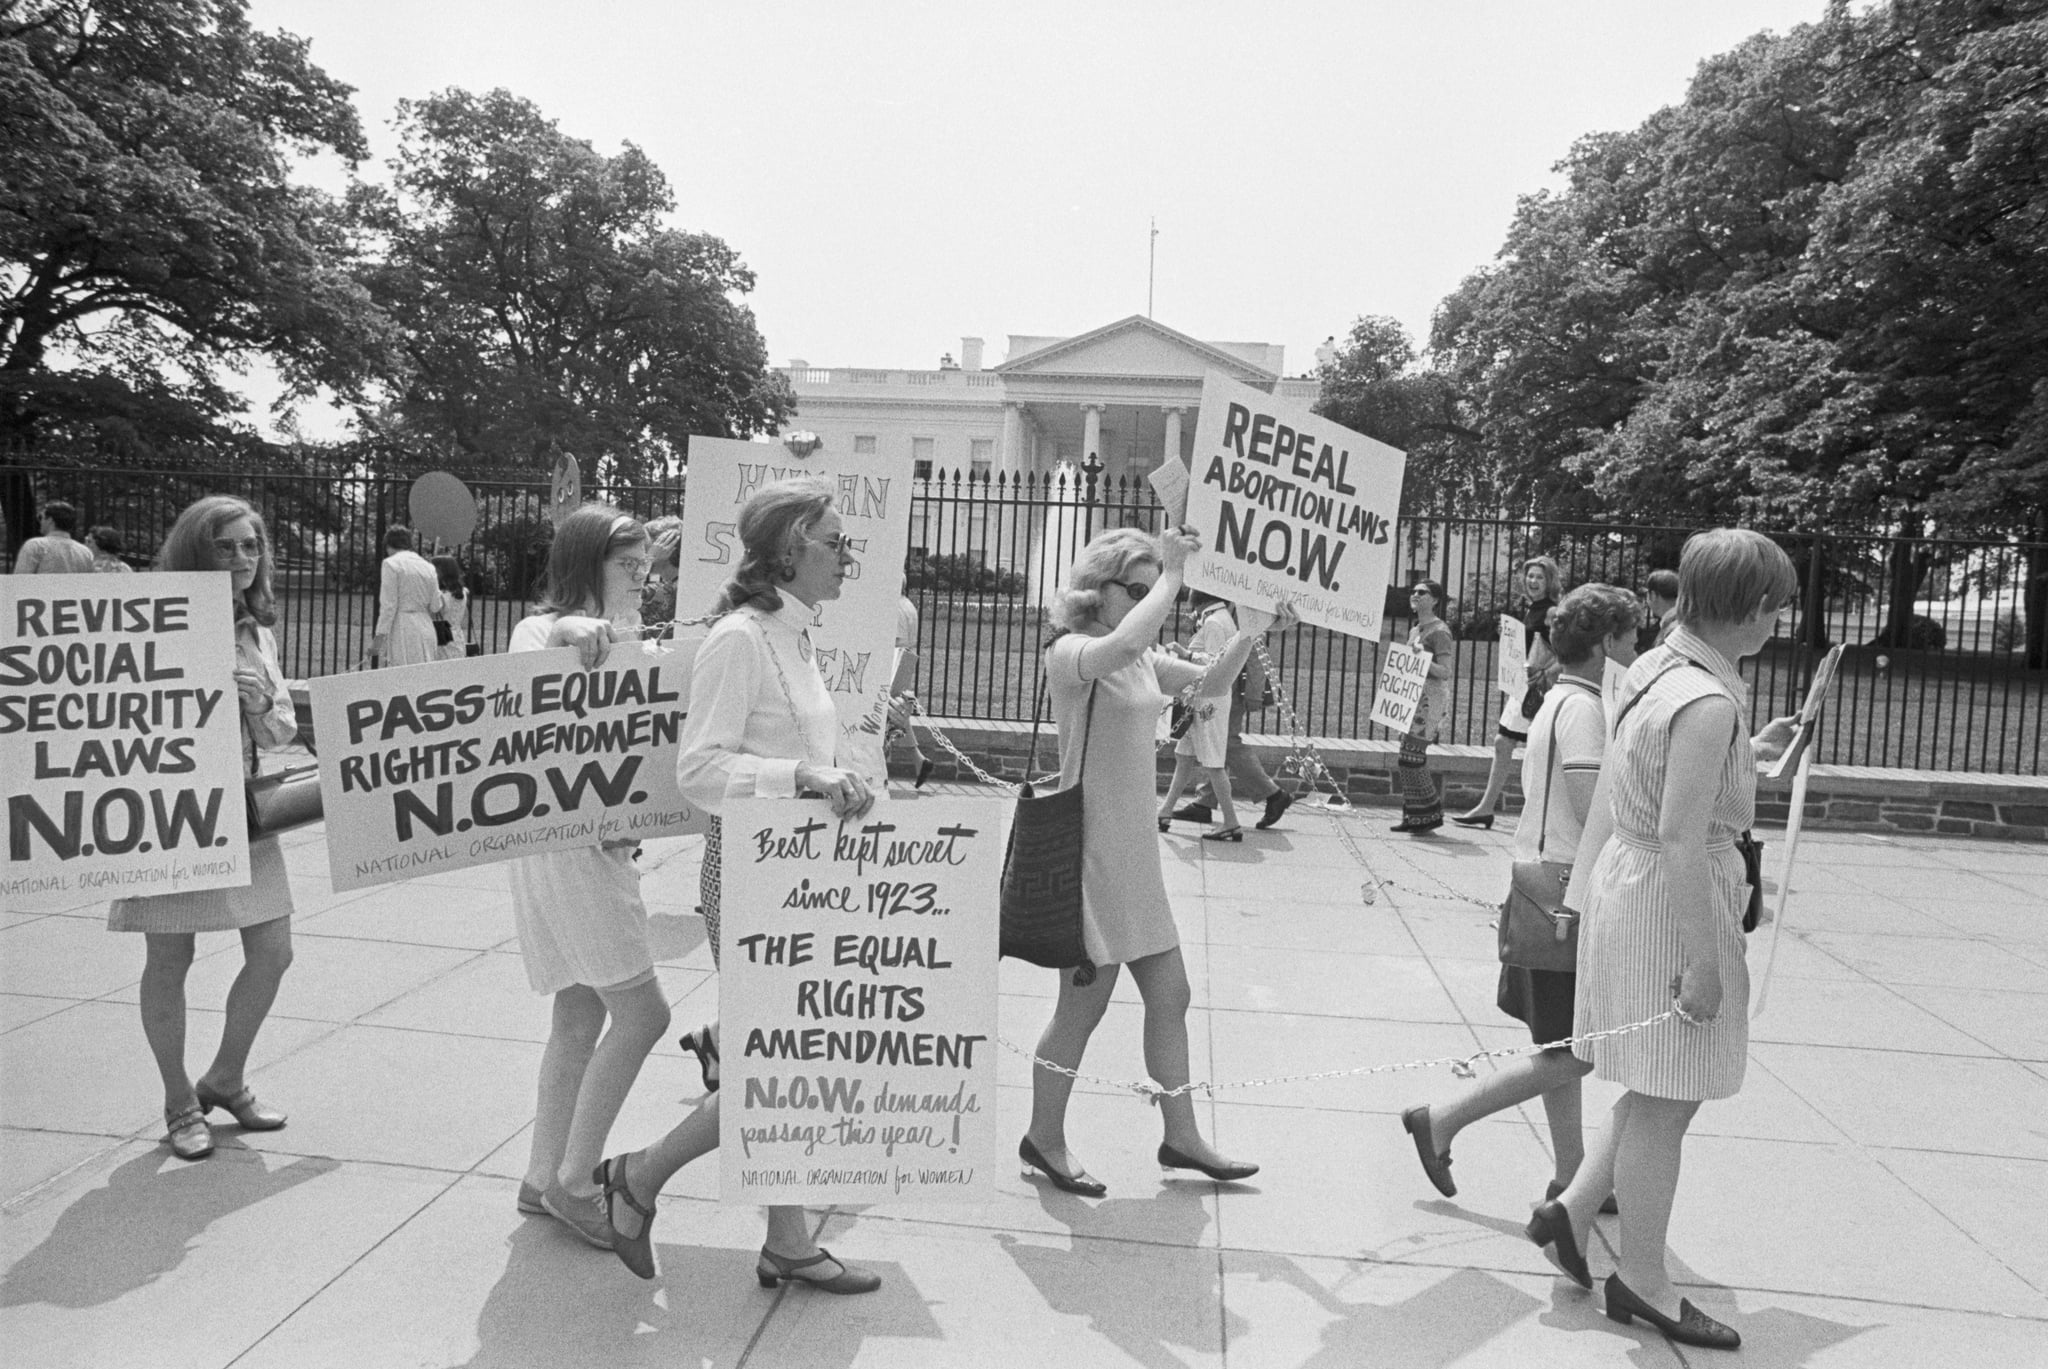 Members of the National Organization for Women demonstrate outside the White House. They wear chains decorated with flowers, and are asking for passage of the Equal Rights Amendment.